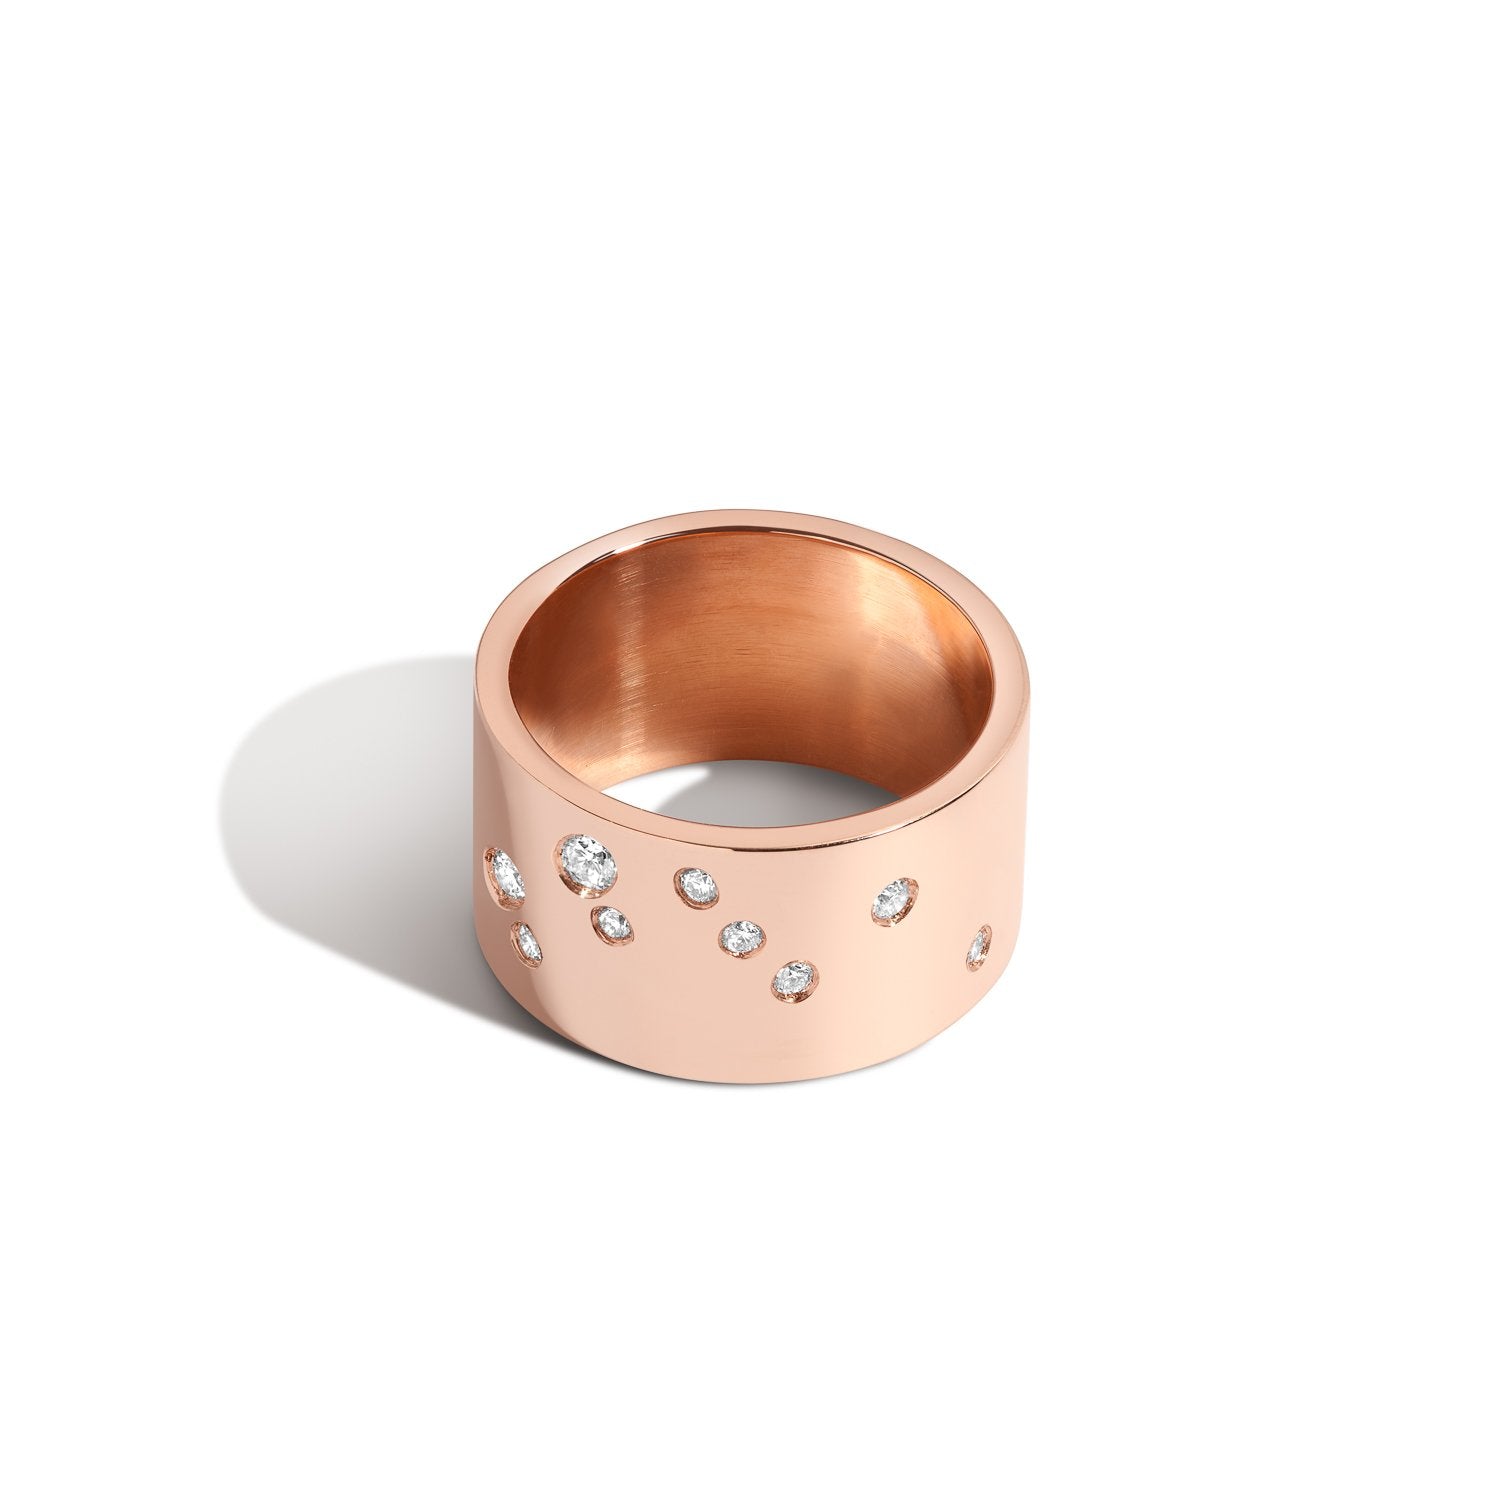 Shahla Karimi Jewelry Zodiac Reveal Ring Collection with White Diamonds - Gemini - 14K Rose Gold - Front View